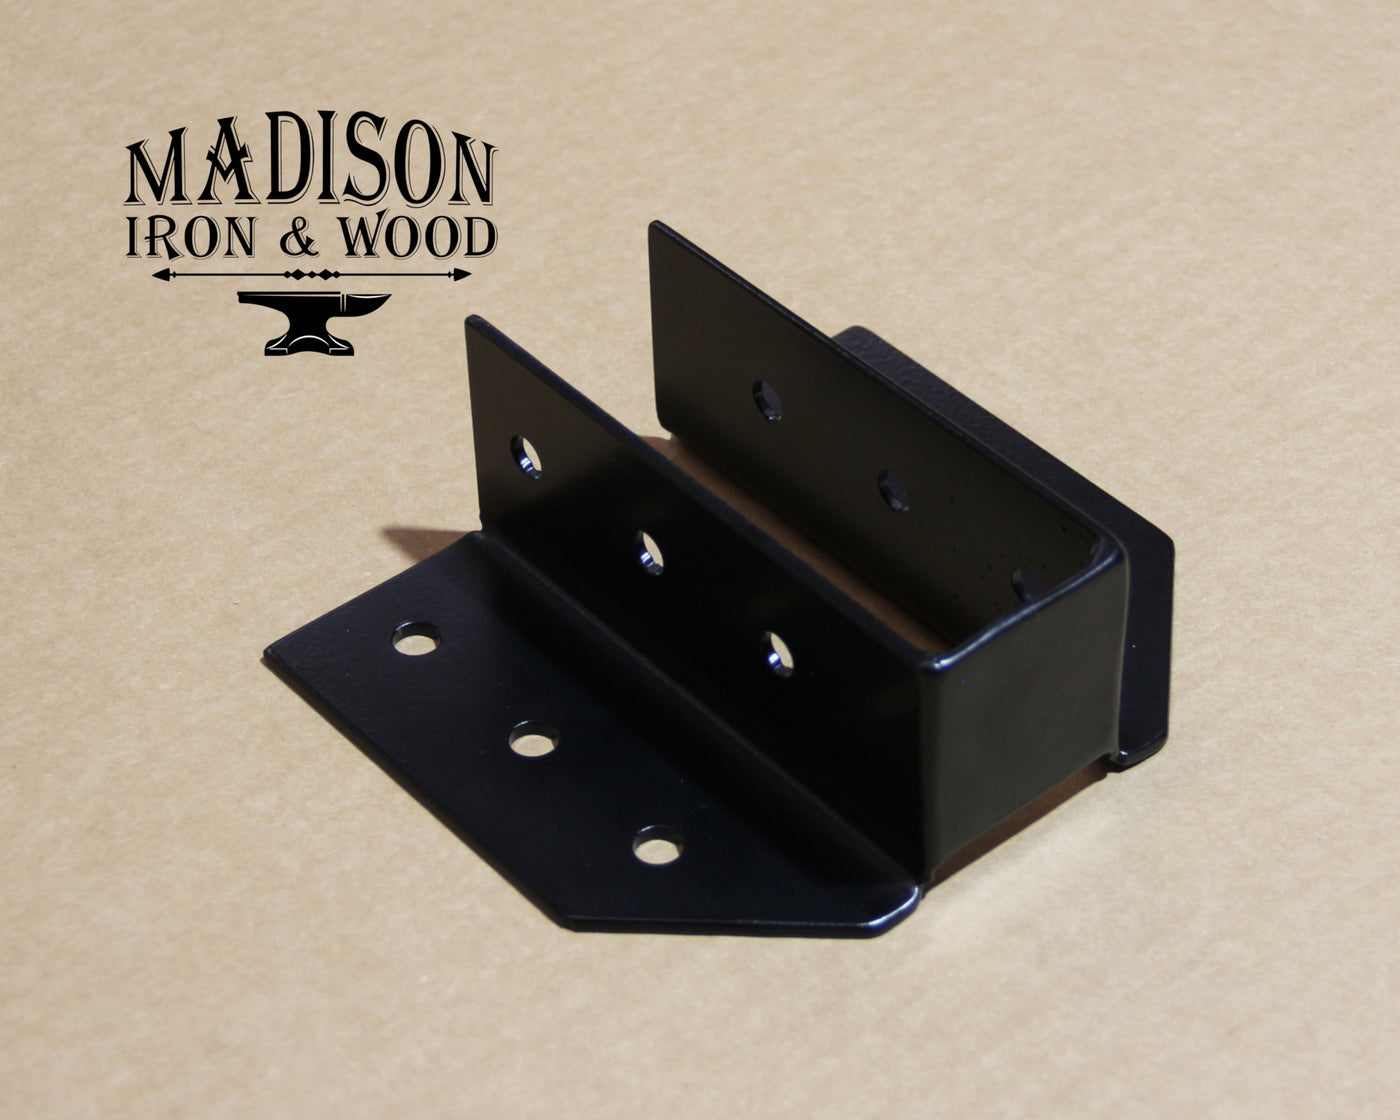 2"x6" Joist Hanger Bracket - Madison Iron and Wood - Brackets - metal outdoor decor - Steel deocrations - american made products - veteran owned business products - fencing decorations - fencing supplies - custom wall decorations - personalized wall signs - steel - decorative post caps - steel post caps - metal post caps - brackets - structural brackets - home improvement - easter - easter decorations - easter gift - easter yard decor